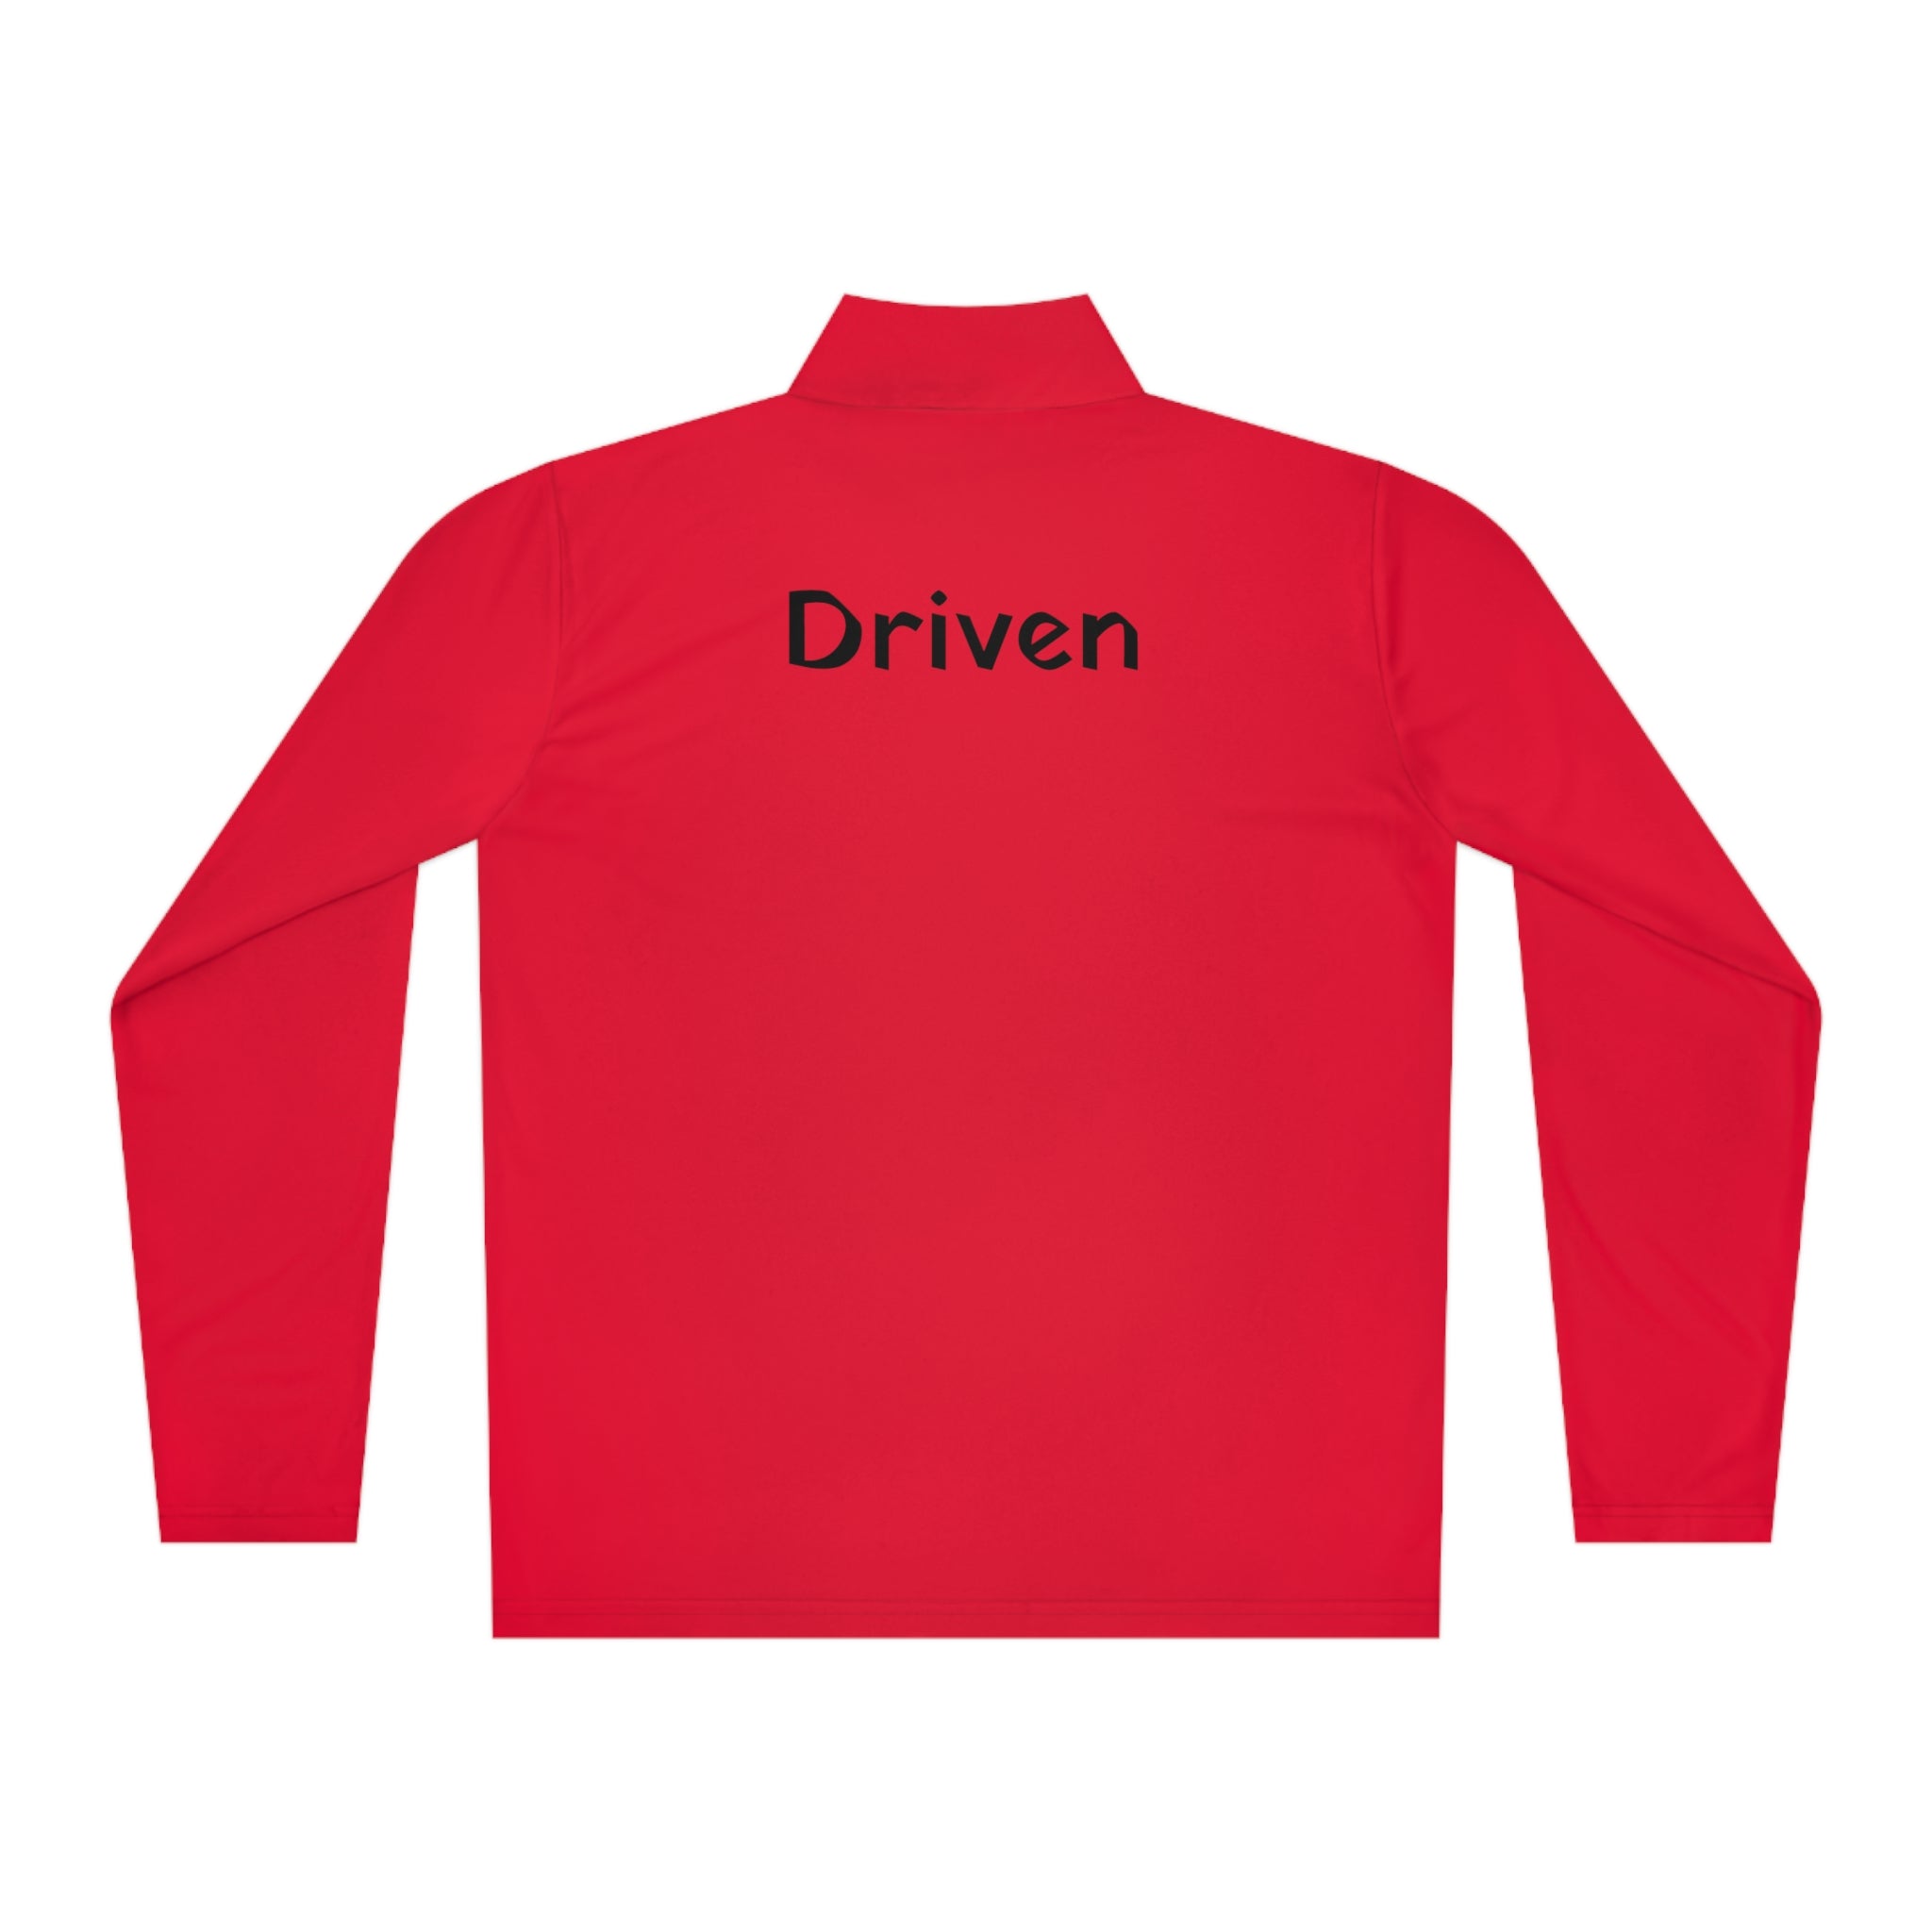 Driven Q-Zip Pullover: Promote Mental Health Atomic Blue Casual Pullover Cozy Pullover Crewneck Pullover Fashion Pullover Graphic Pullover Knit Pullover Layering Piece Lightweight Pullover Men's Pullover Pullover Pullover Collection Pullover Sweater Stylish Pullover Trendy Pullover Women's Pullover Long-sleeve 14135982478328946554_2048 Printify